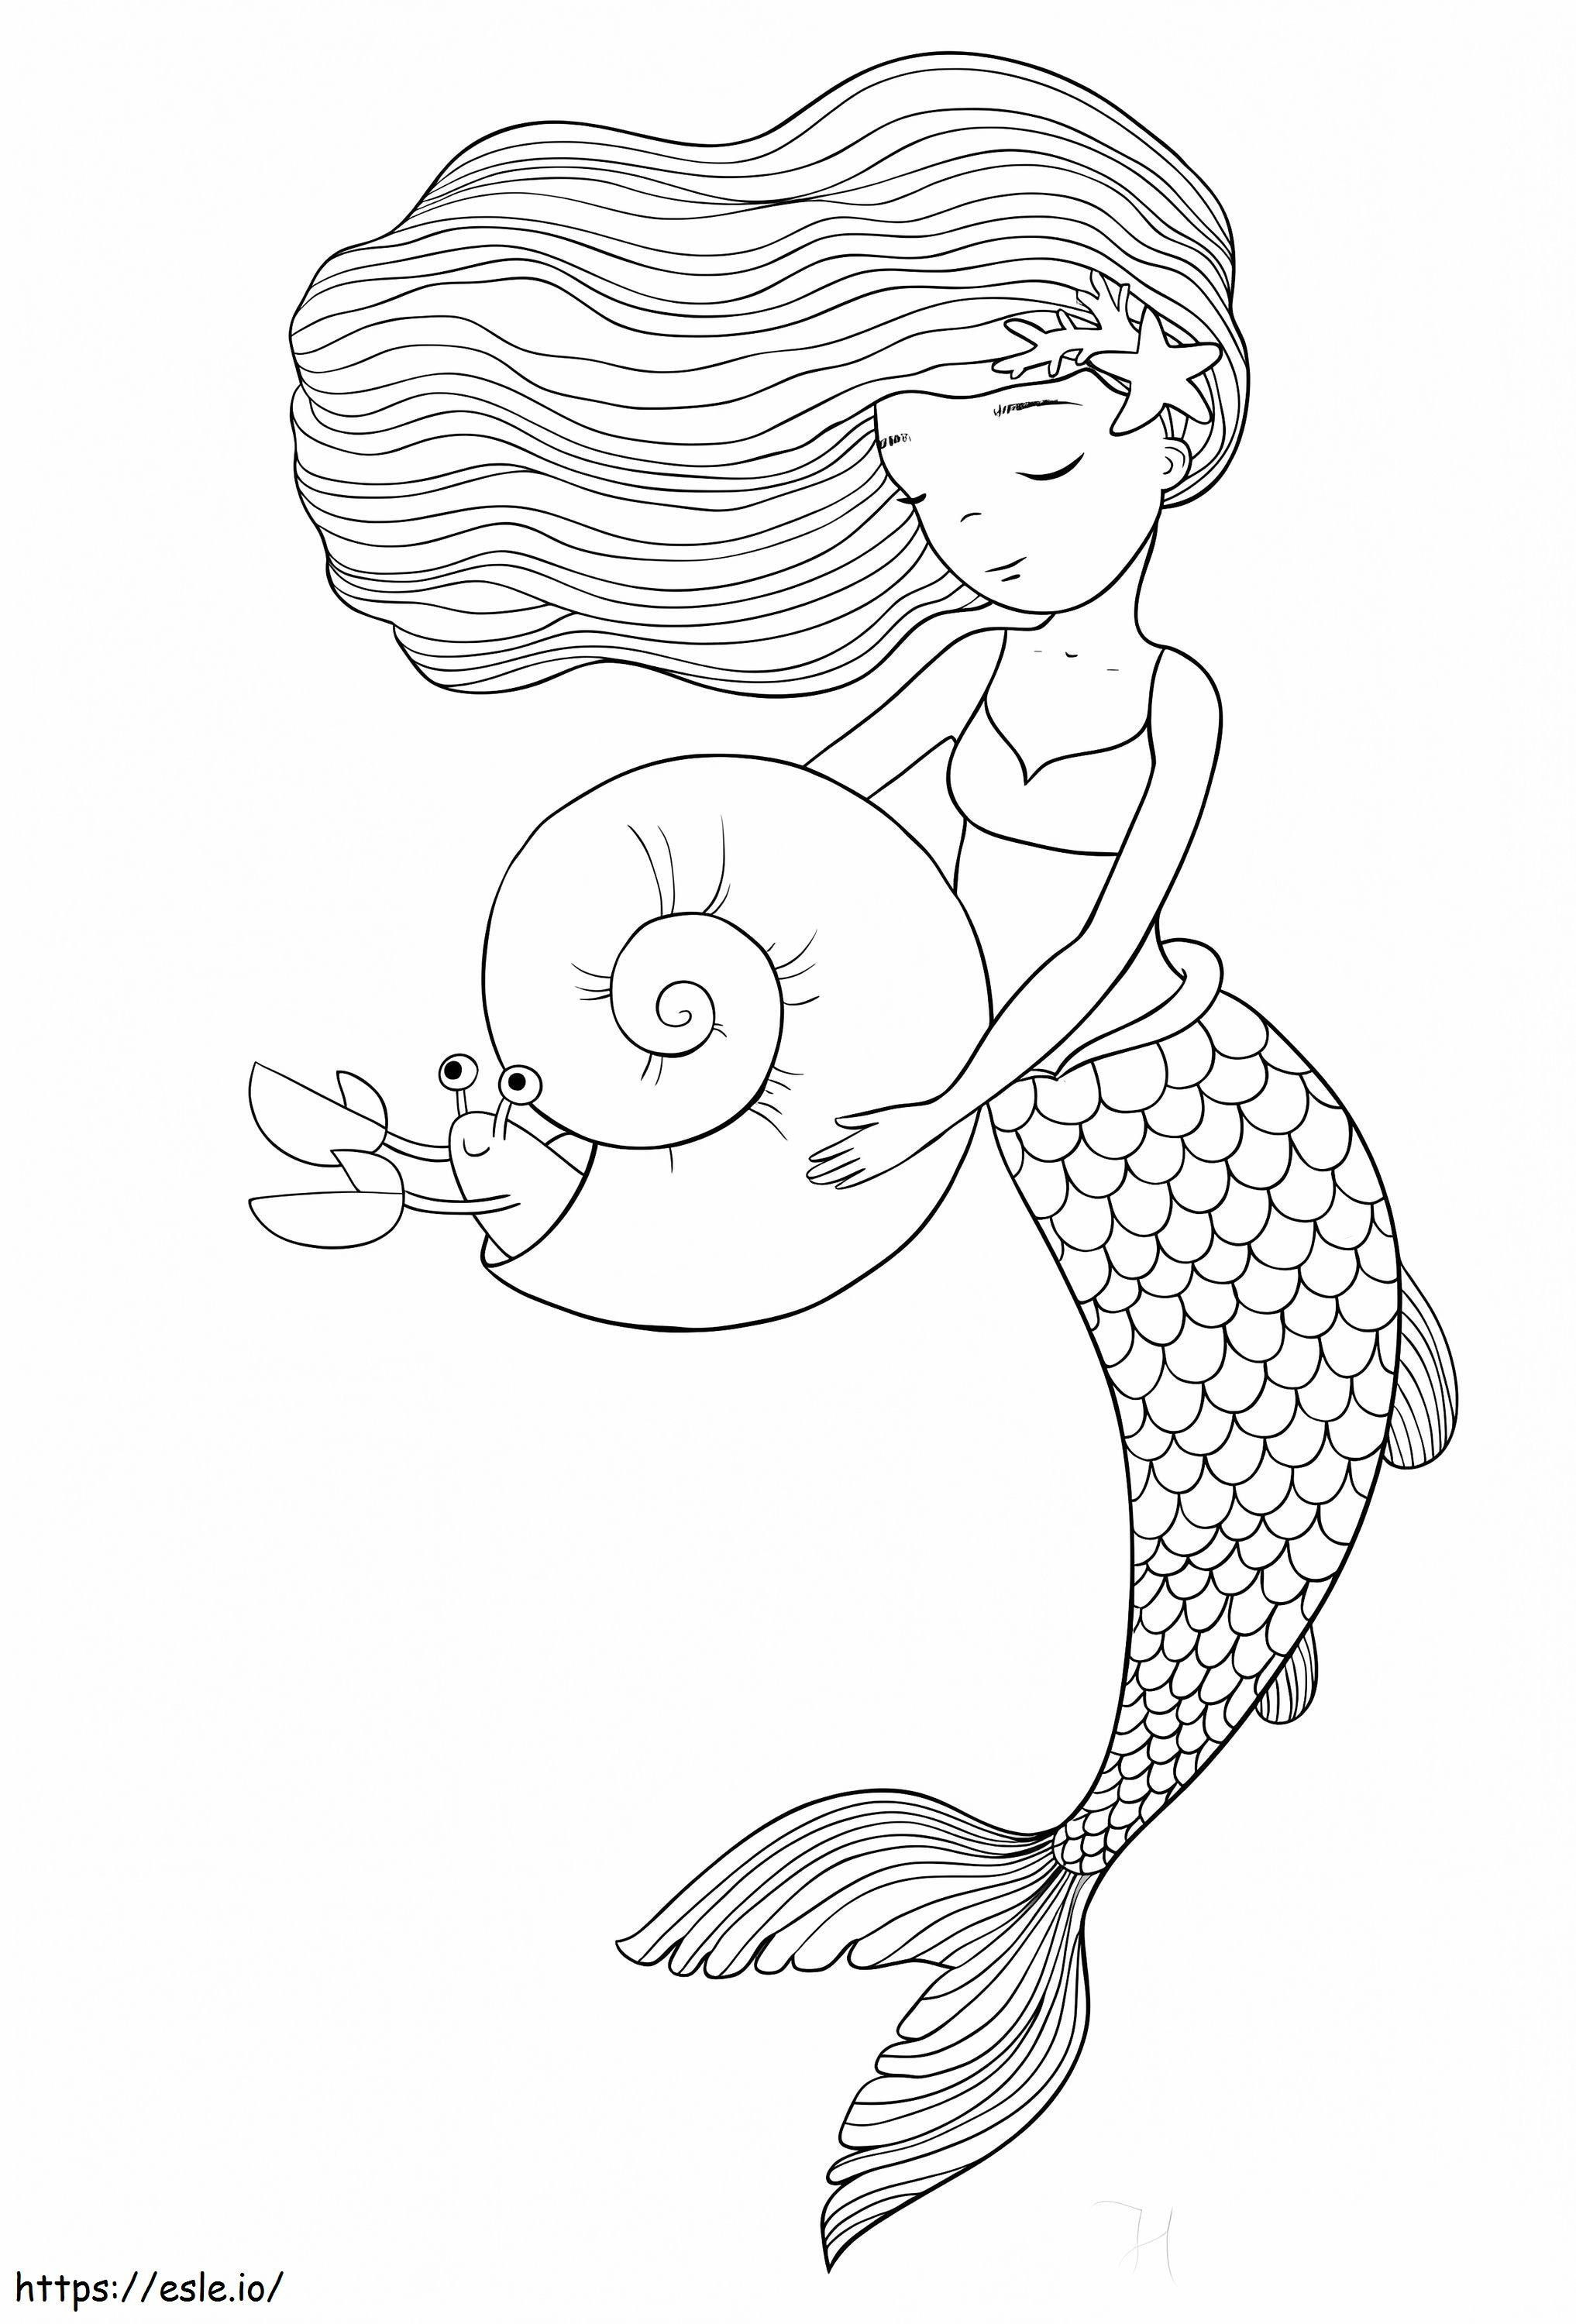 Mermaid And Hermit Crab coloring page